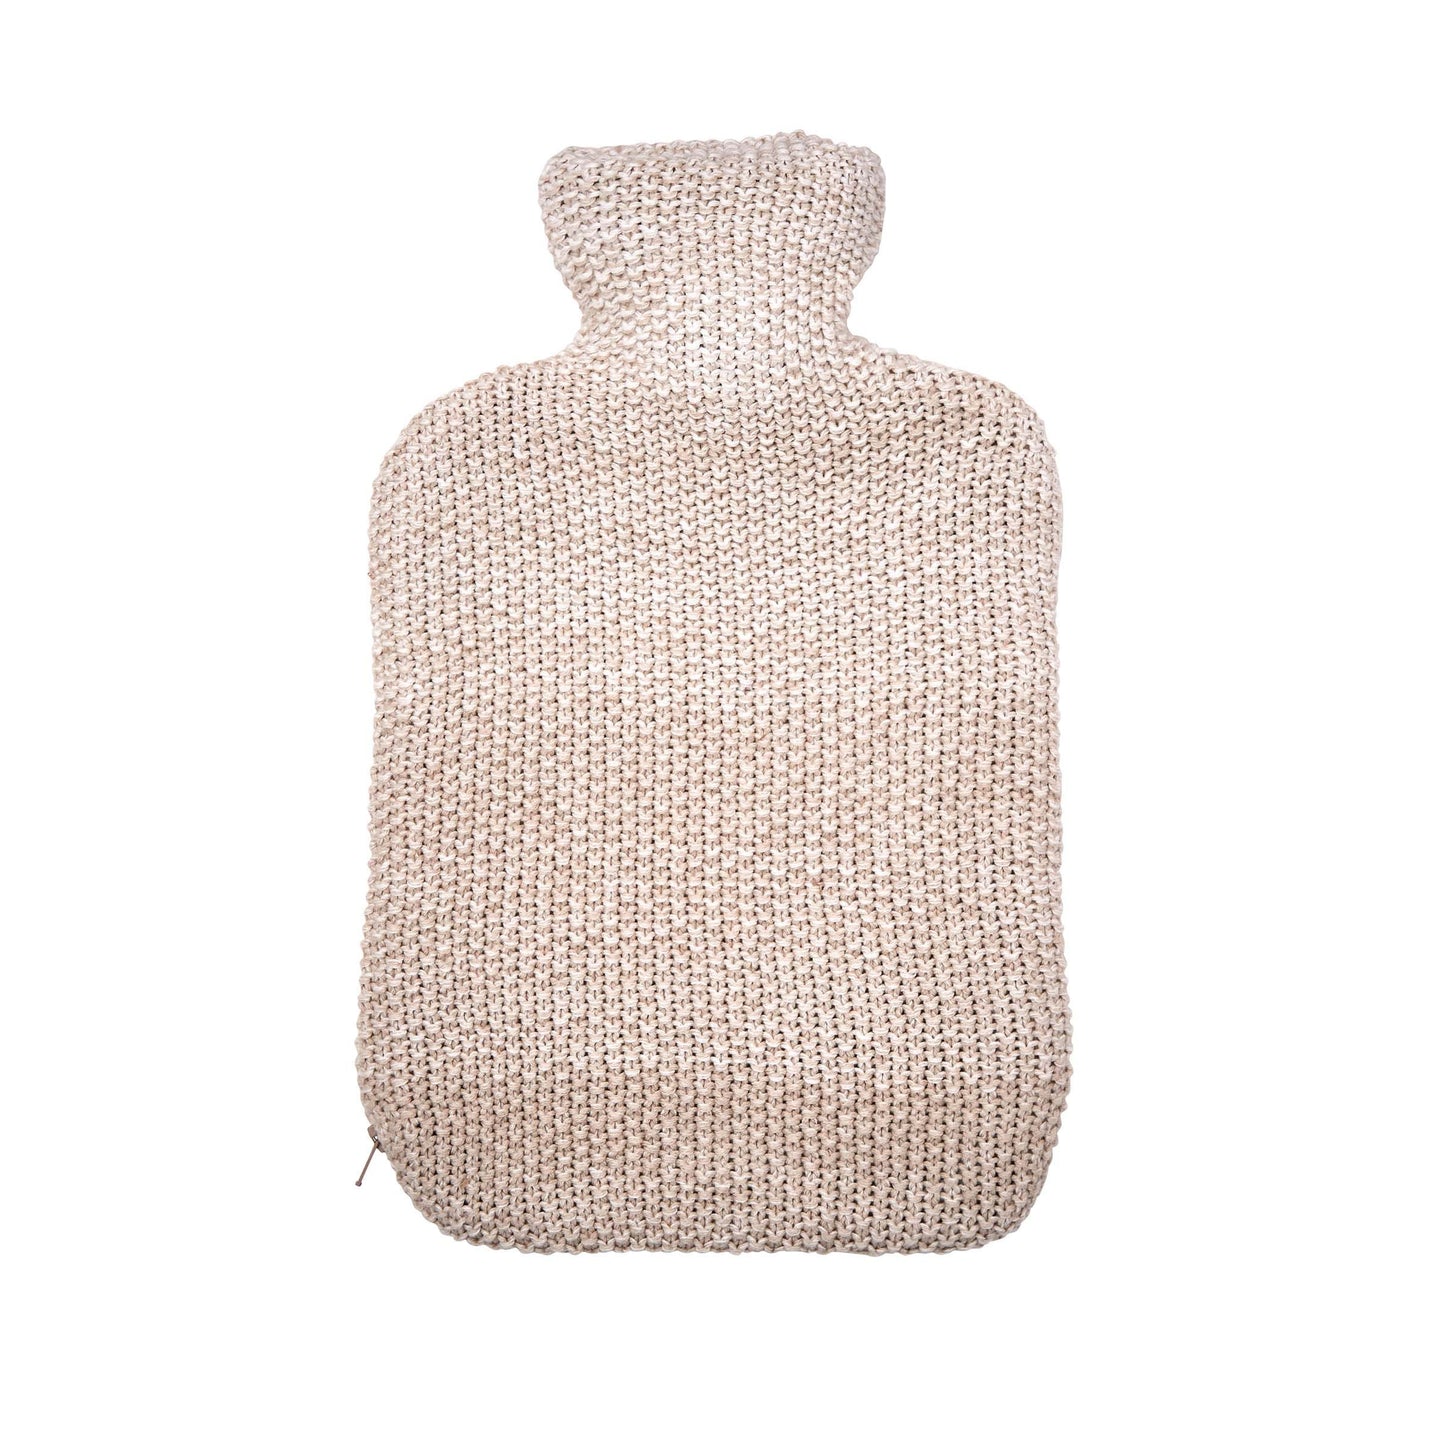 Ombre Knit Hot Water Bottle & Cover Linen